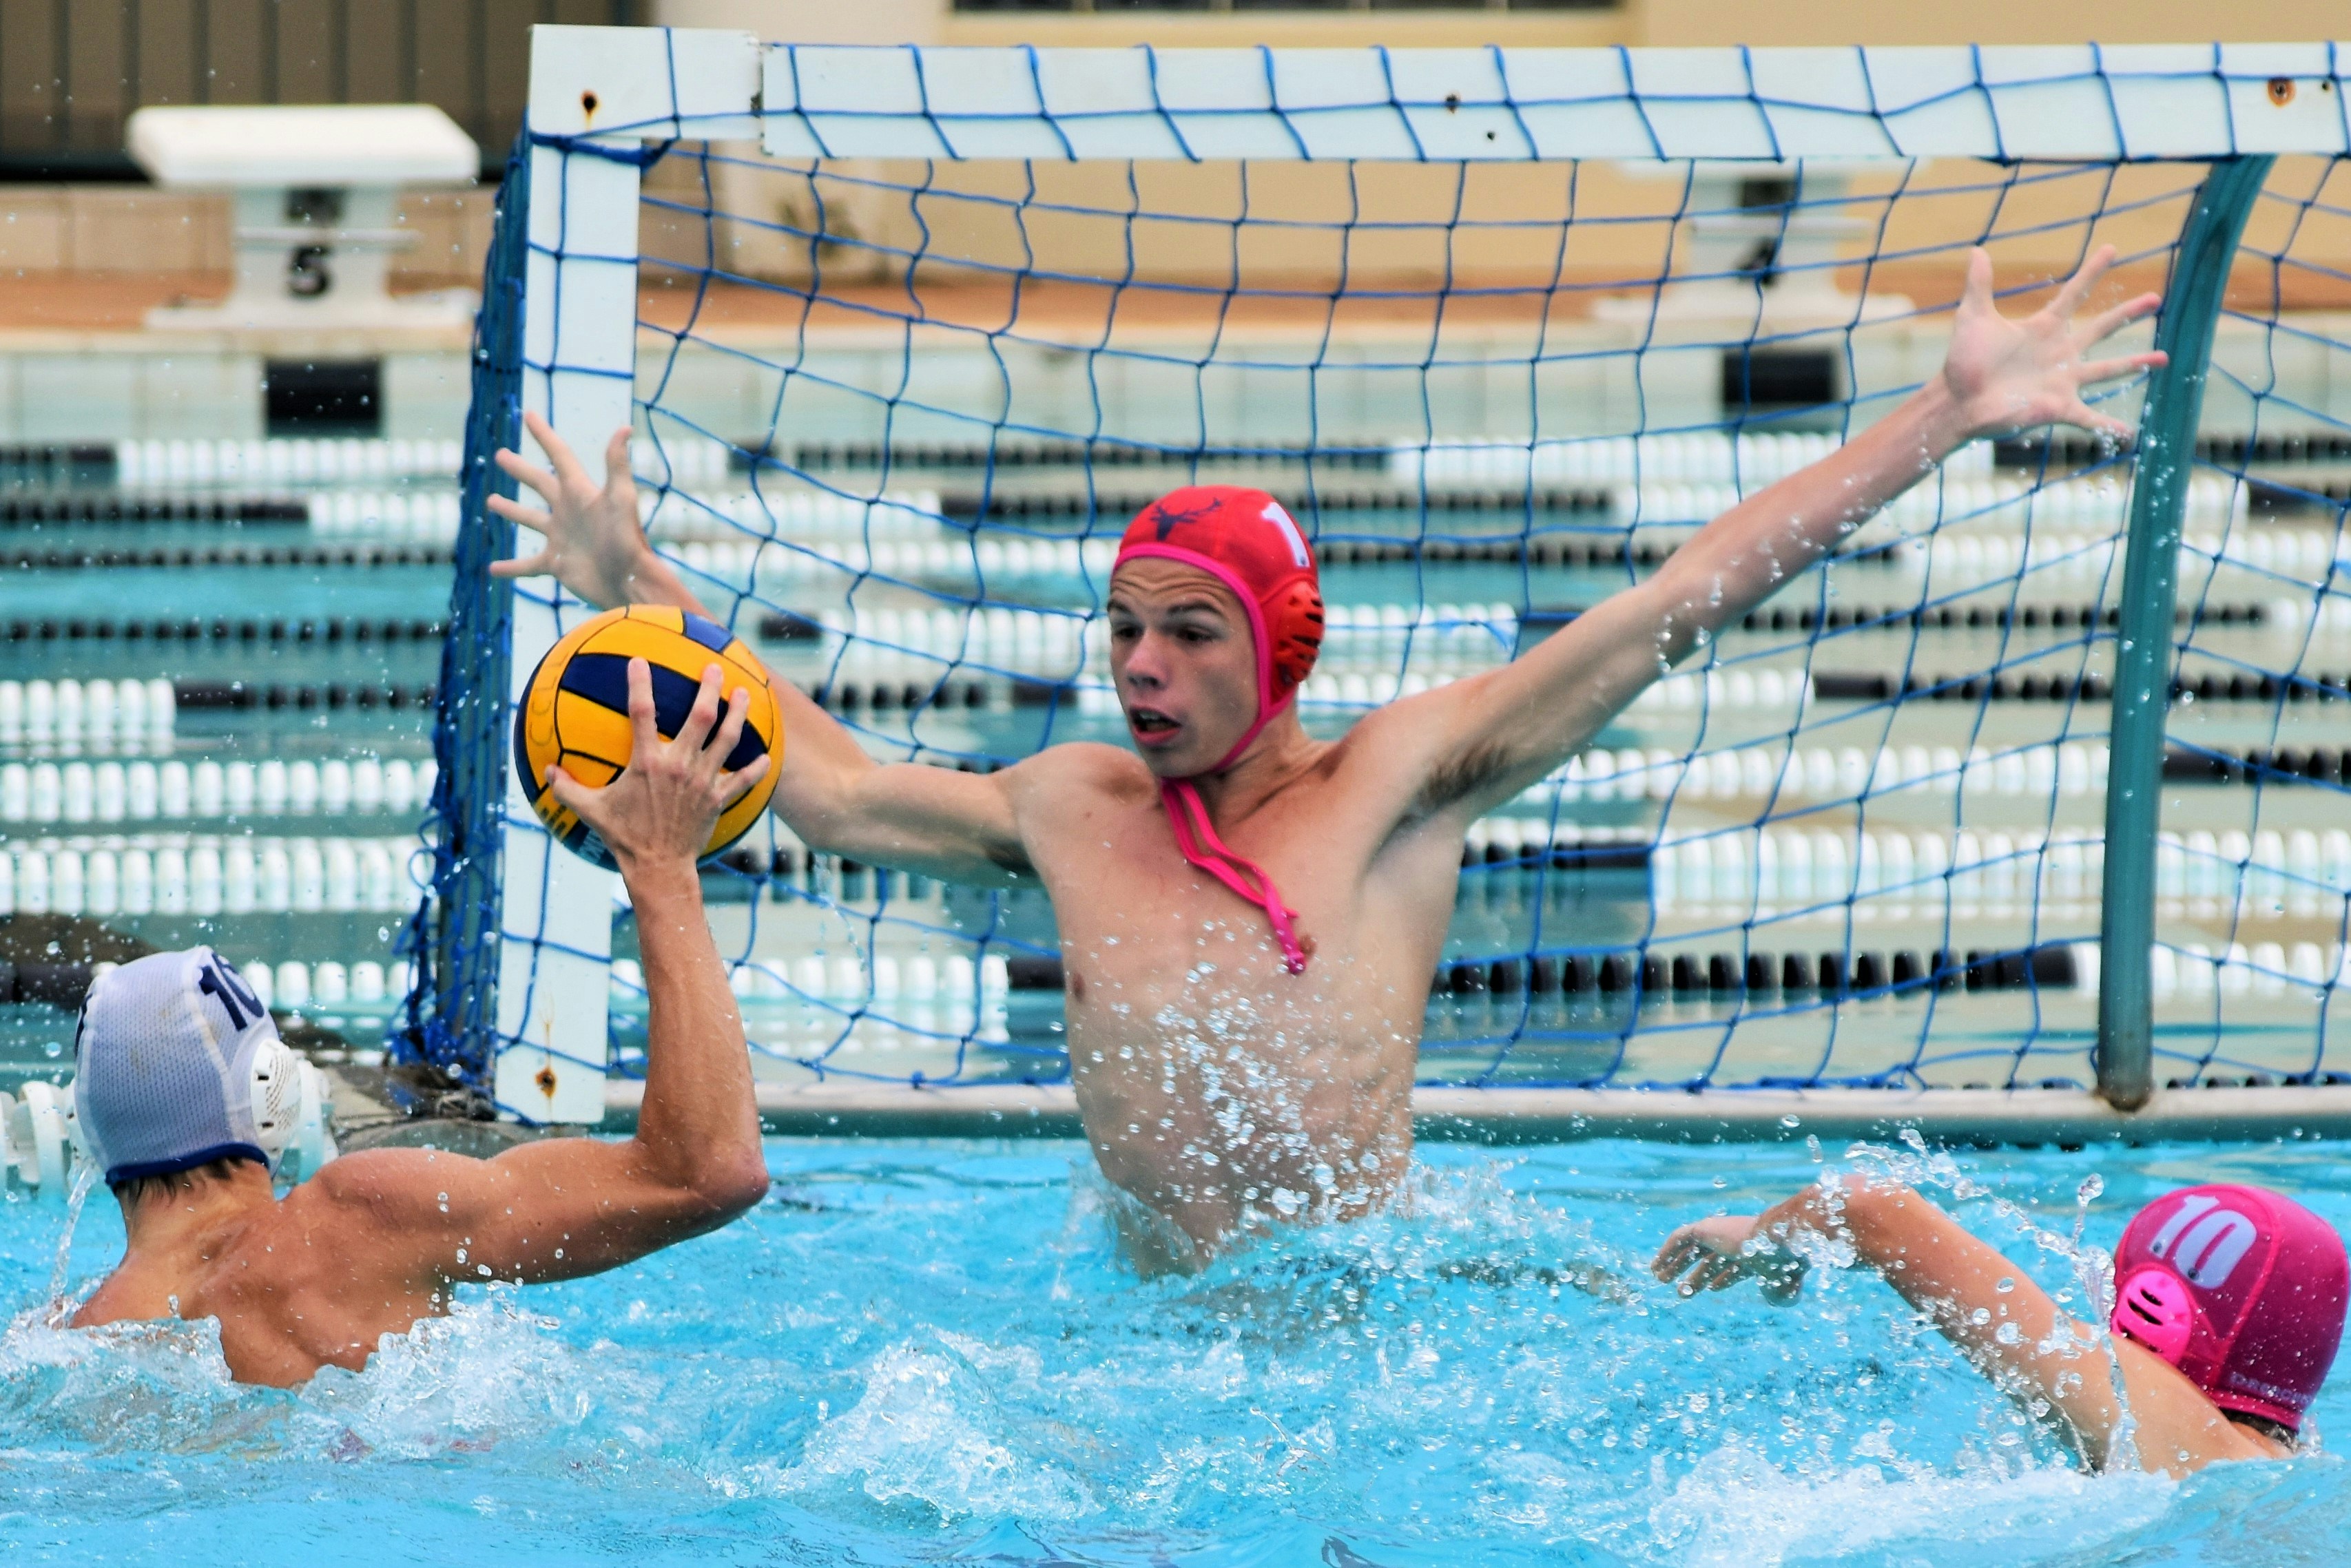 During a water polo match the goal keeper (red cap) lifts himself out of the water and spreads his arms as wide as possible to prevent the other team scoring.